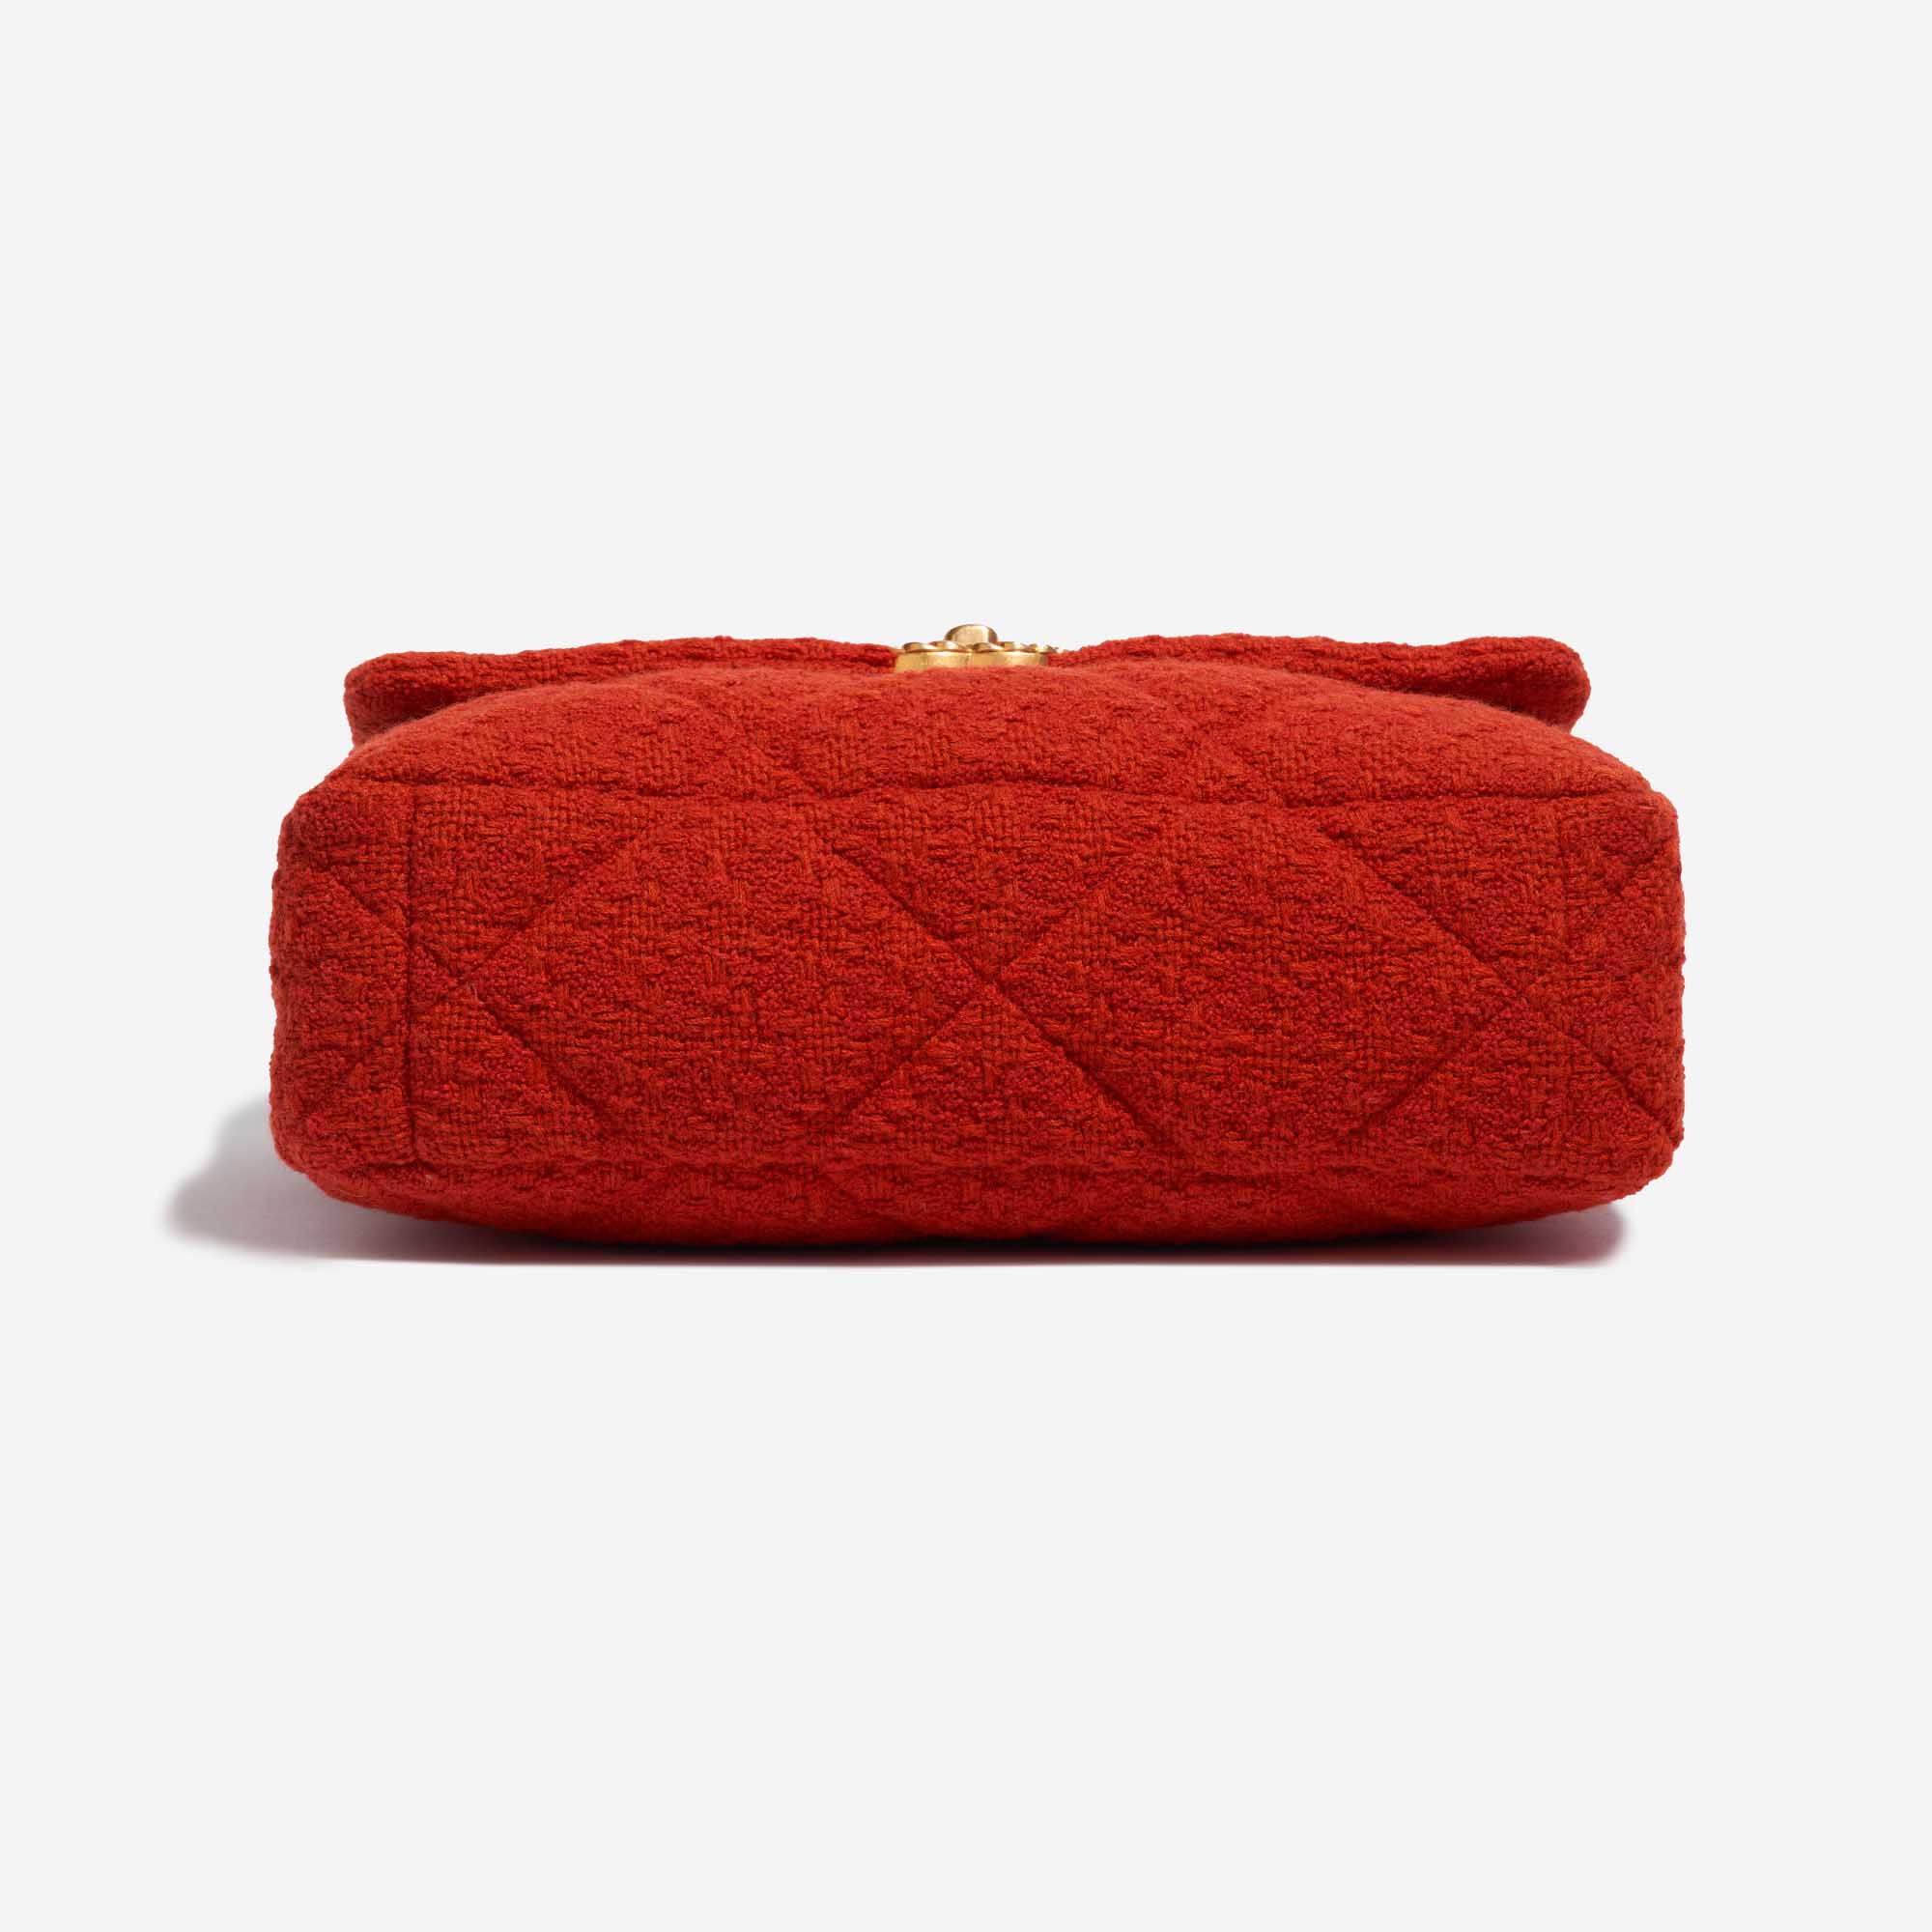 Pre-owned Chanel bag 19 Flap Bag Large Wool Red Red Bottom | Sell your designer bag on Saclab.com